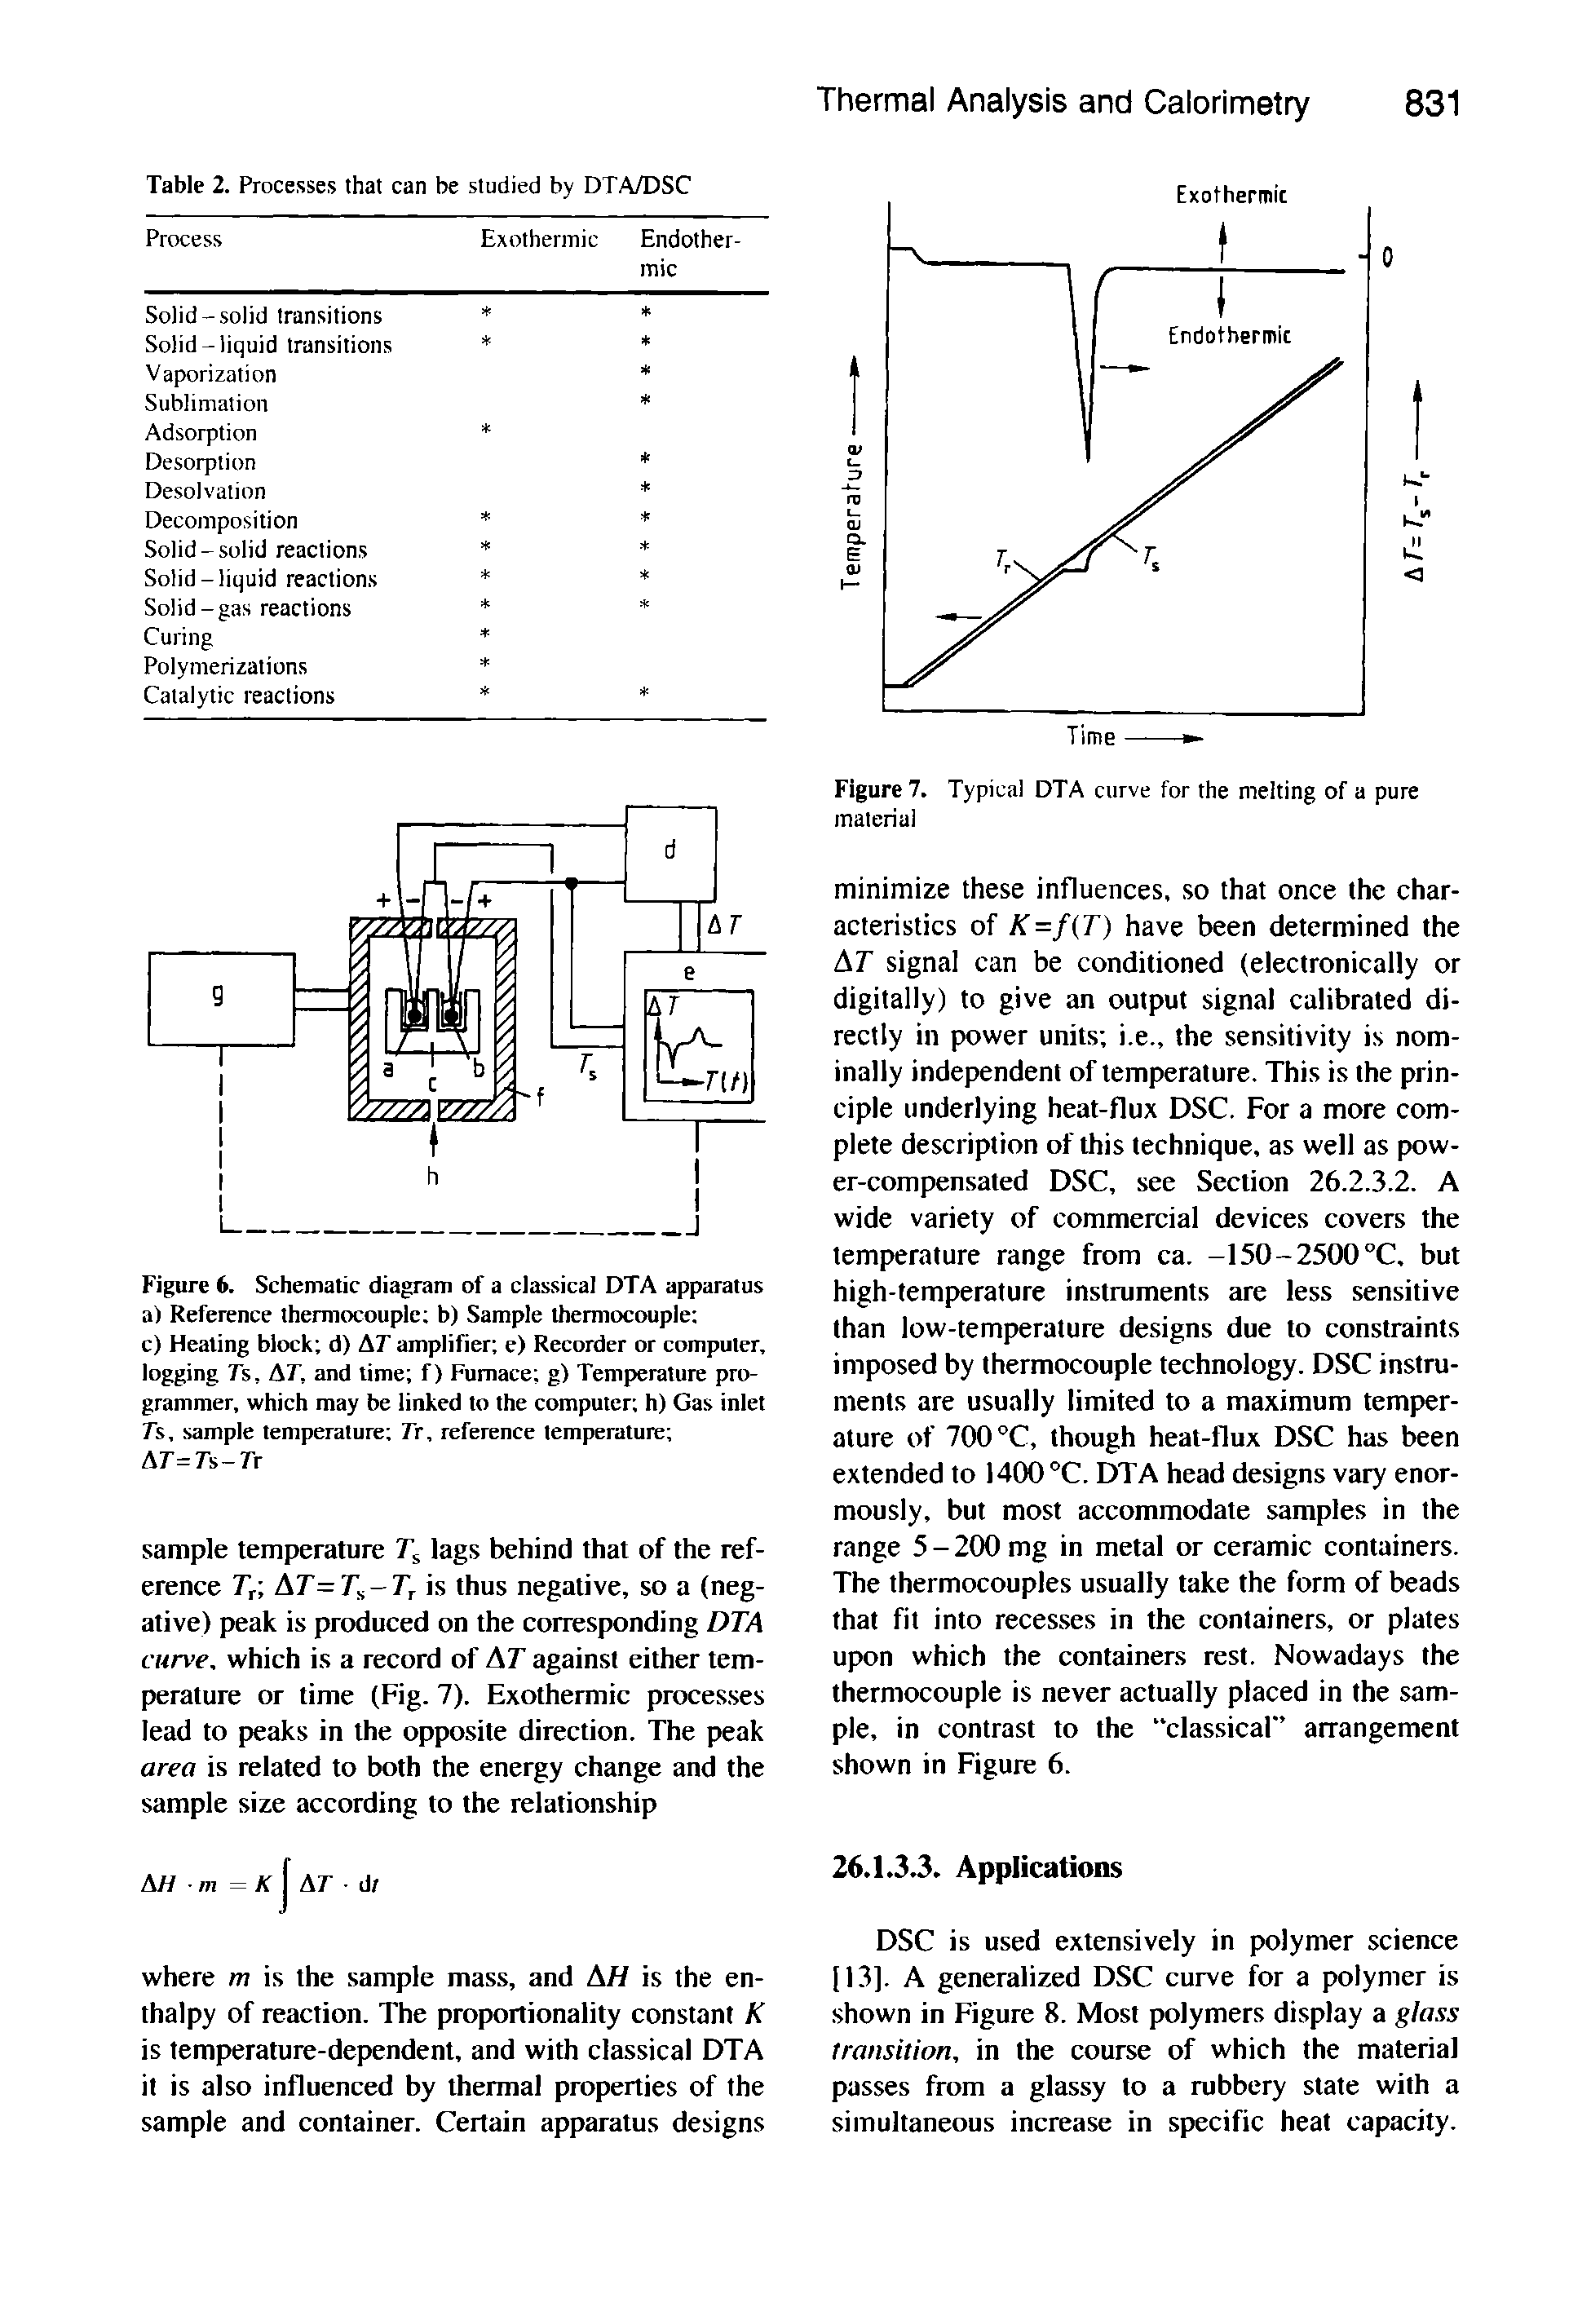 Figure 6. Schematic diagram of a classical DTA apparatus a) Reference thermocouple b) Sample thermocouple c) Healing block d) AT amplifier e) Recorder or computer, logging Ts, AT, and time f) Furnace g) Temperature programmer, which may be linked to the computer h) Gas inlet 7s, sample temperature 7r, reference temperature AT=7 s-7 r...